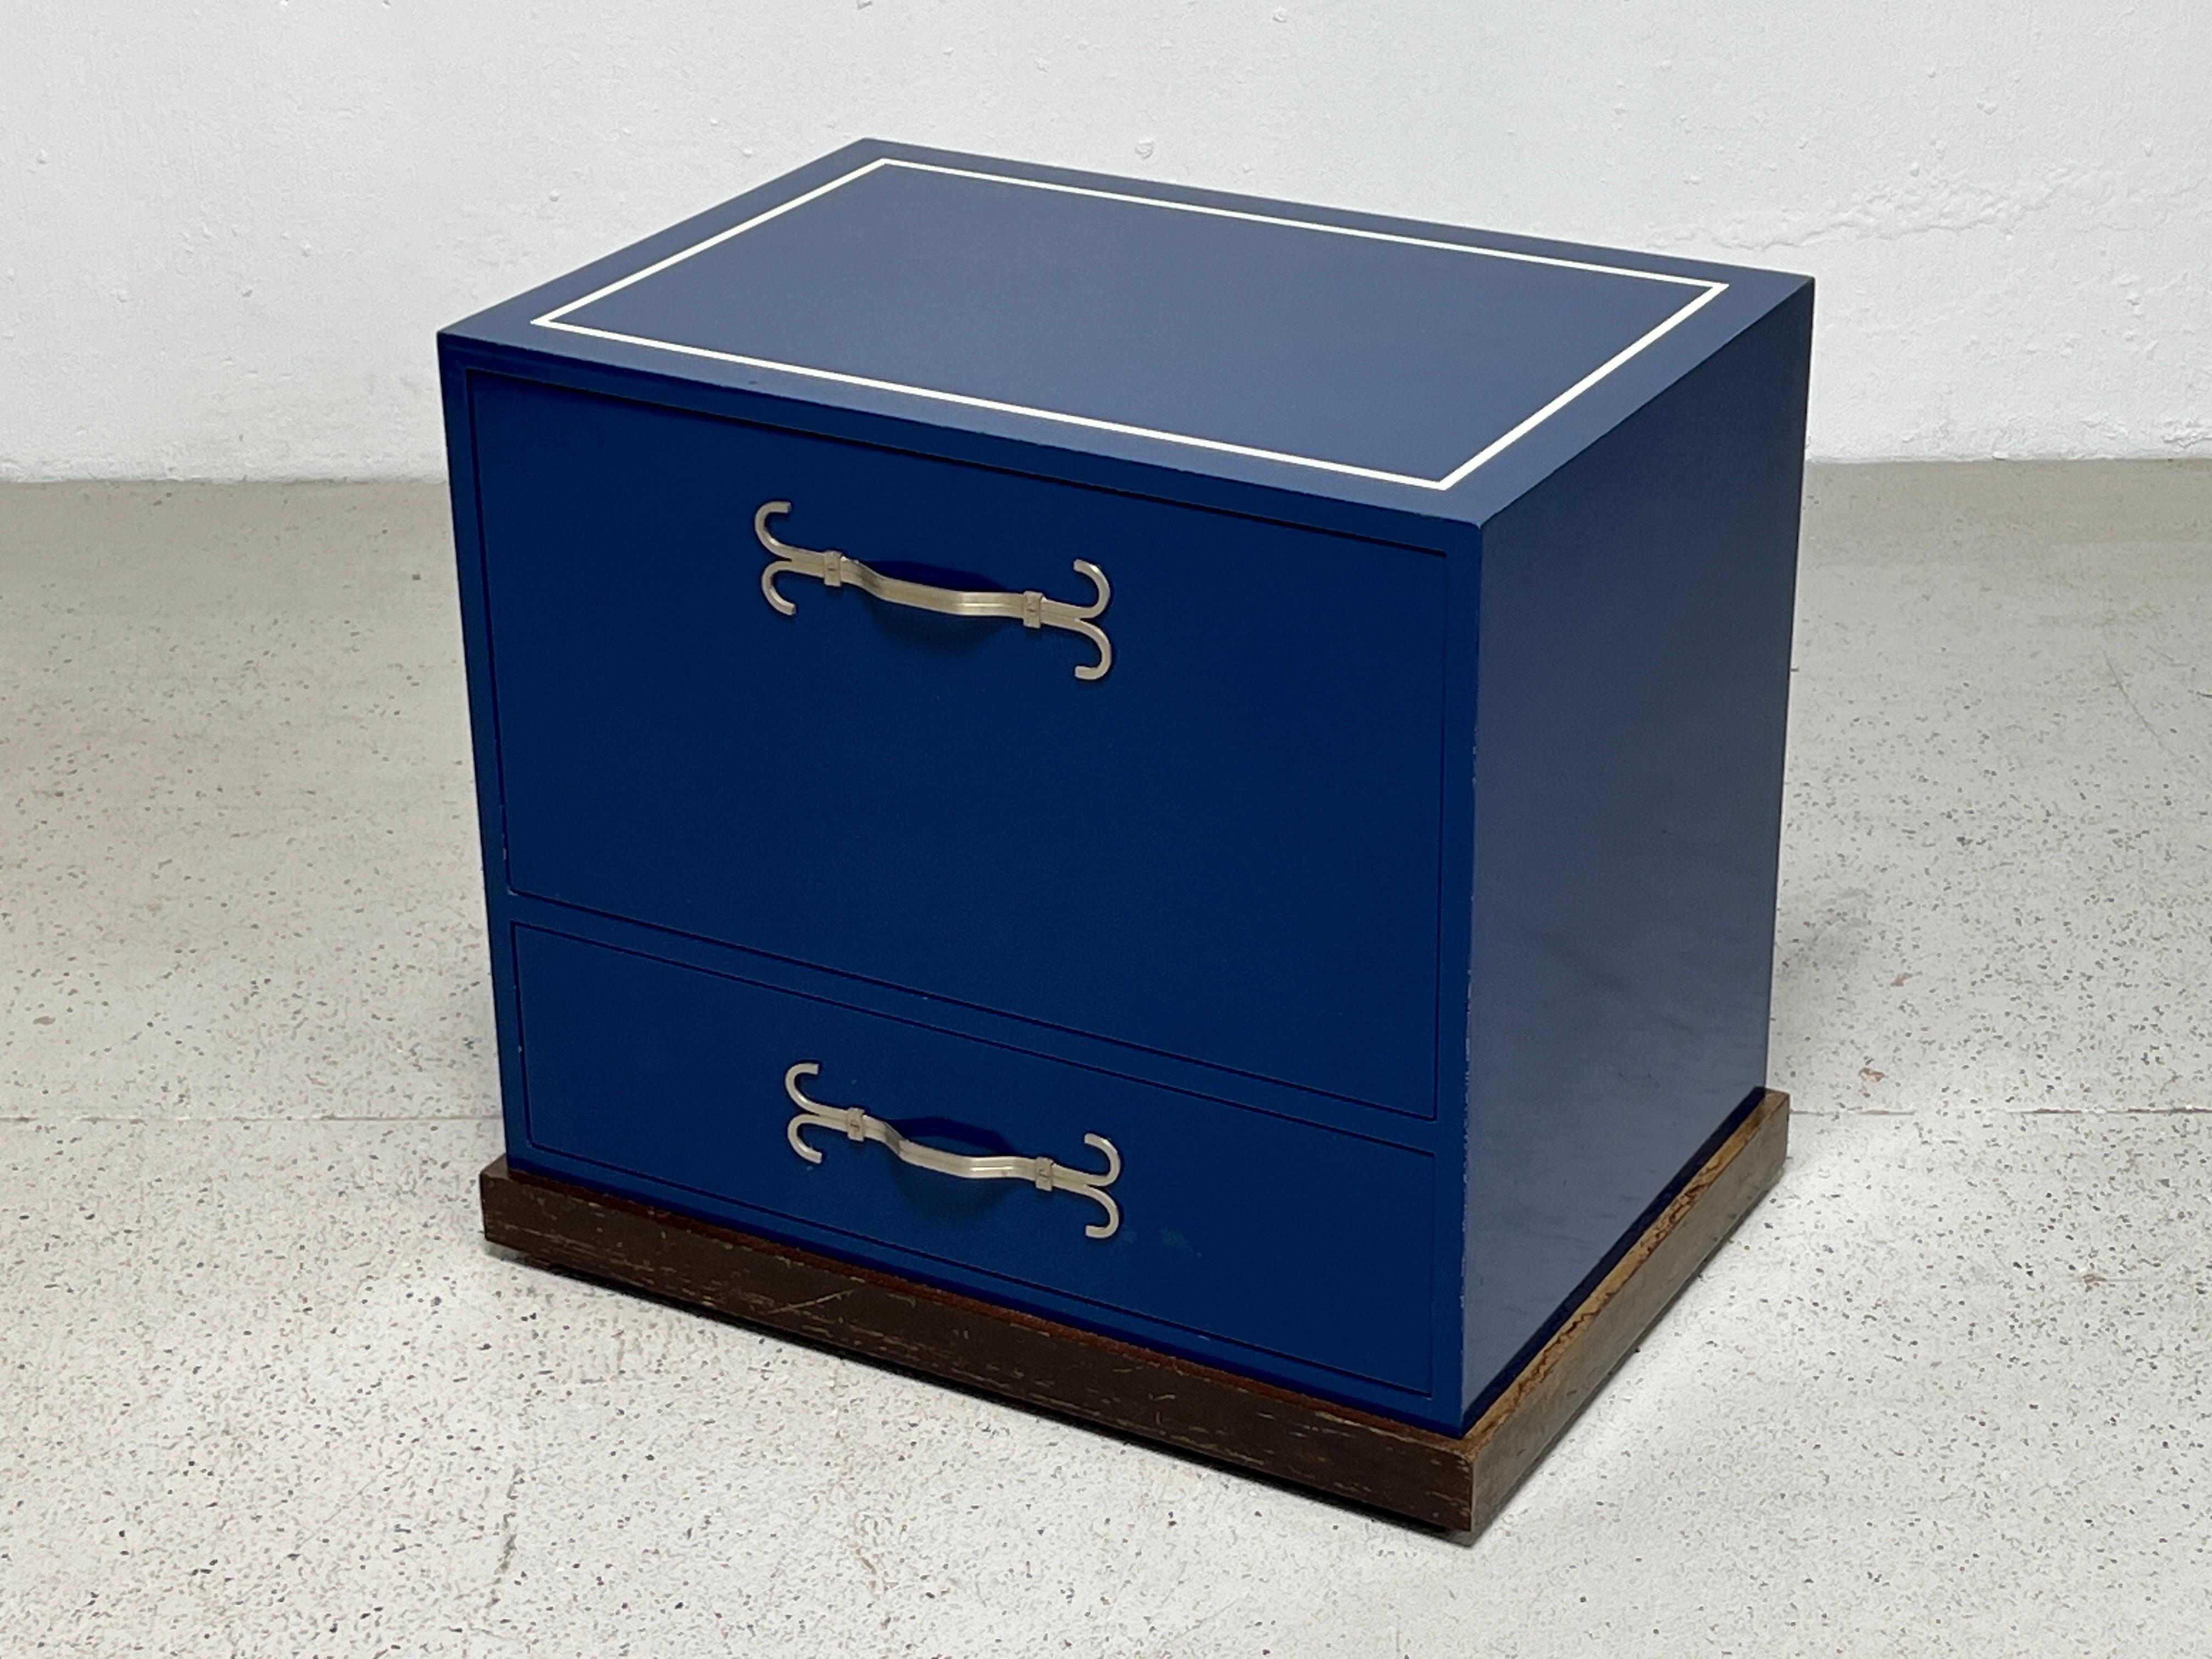 A small chest / nightstand designed by Tommi Parzinger for Parzinger Originals. Original blue lacquer with pull out file drawer on casters.